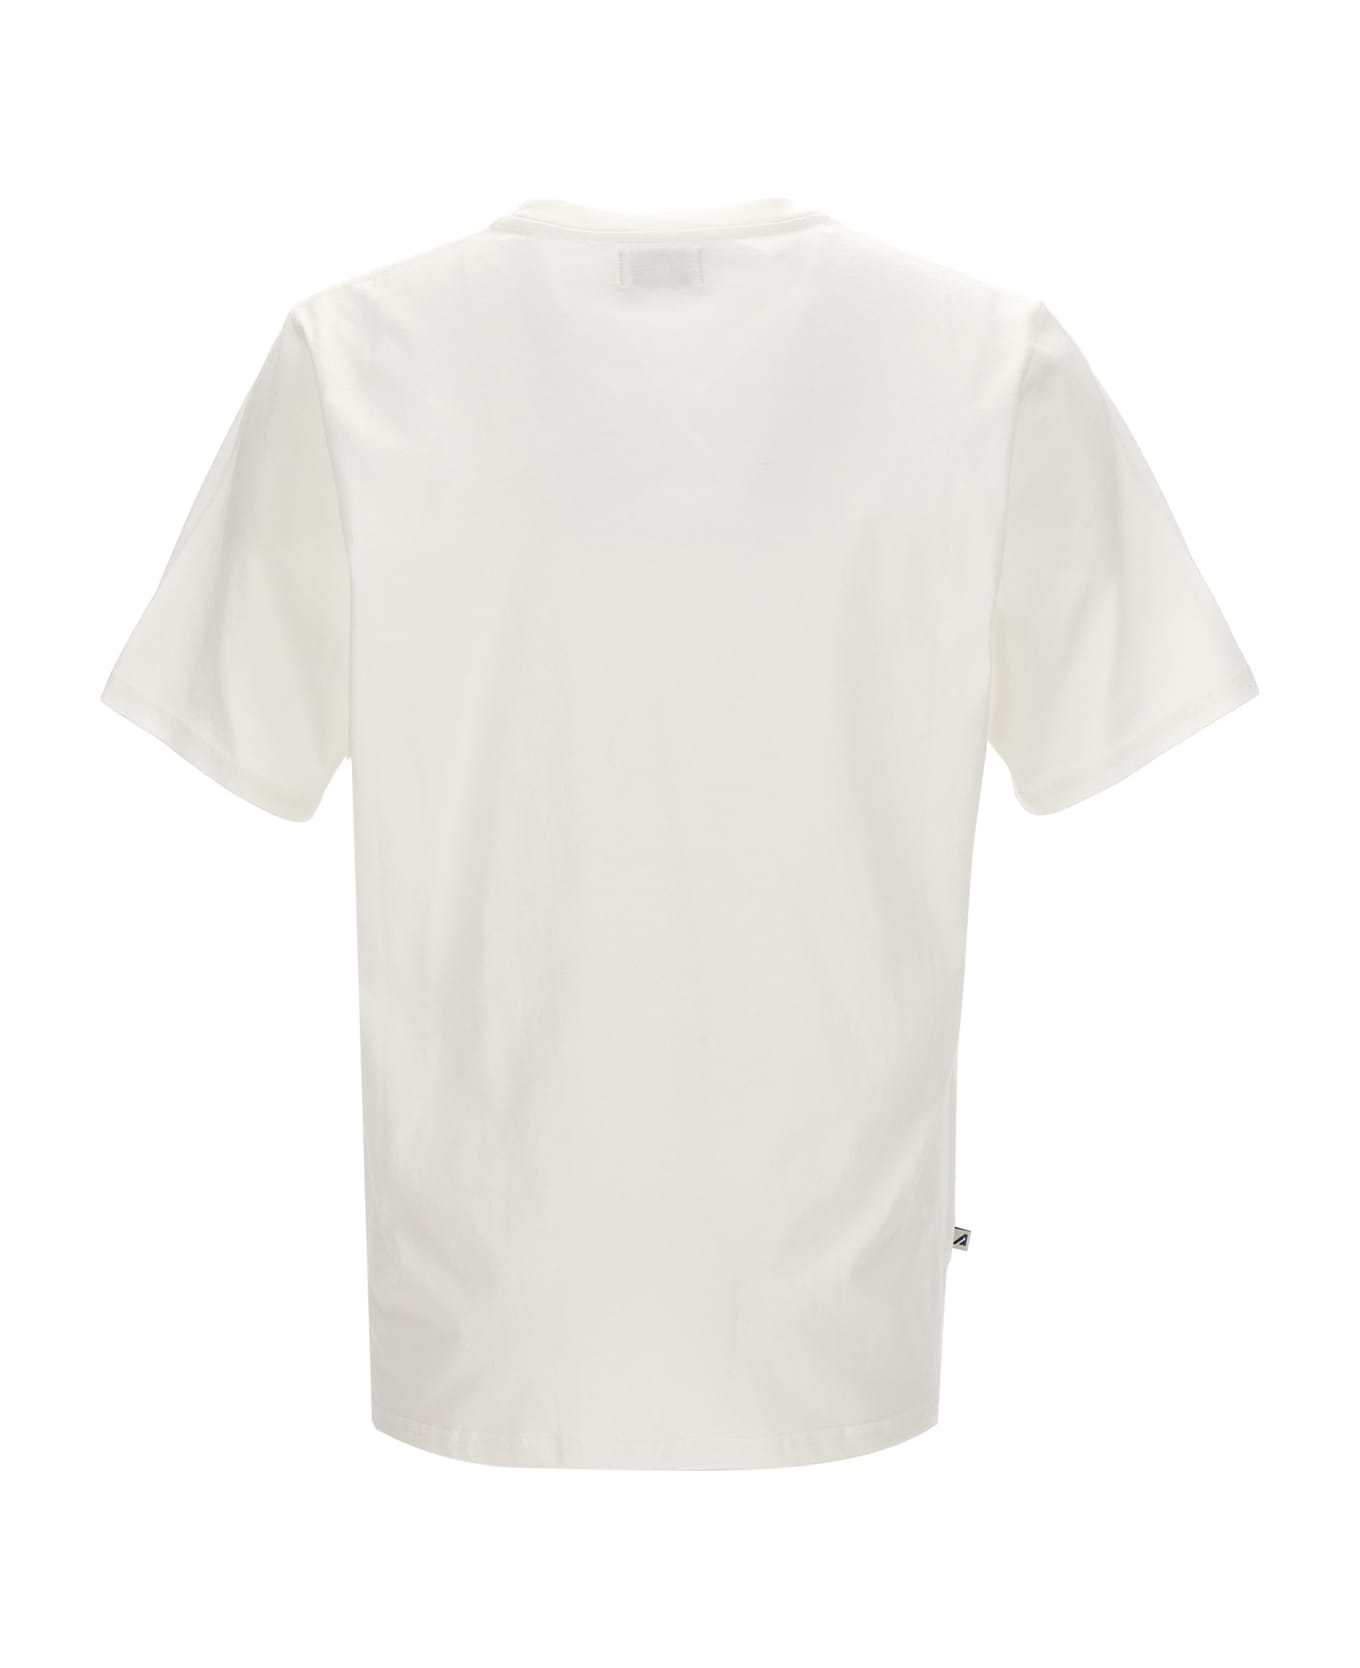 Autry Cotton T-shirt With Logo - White シャツ